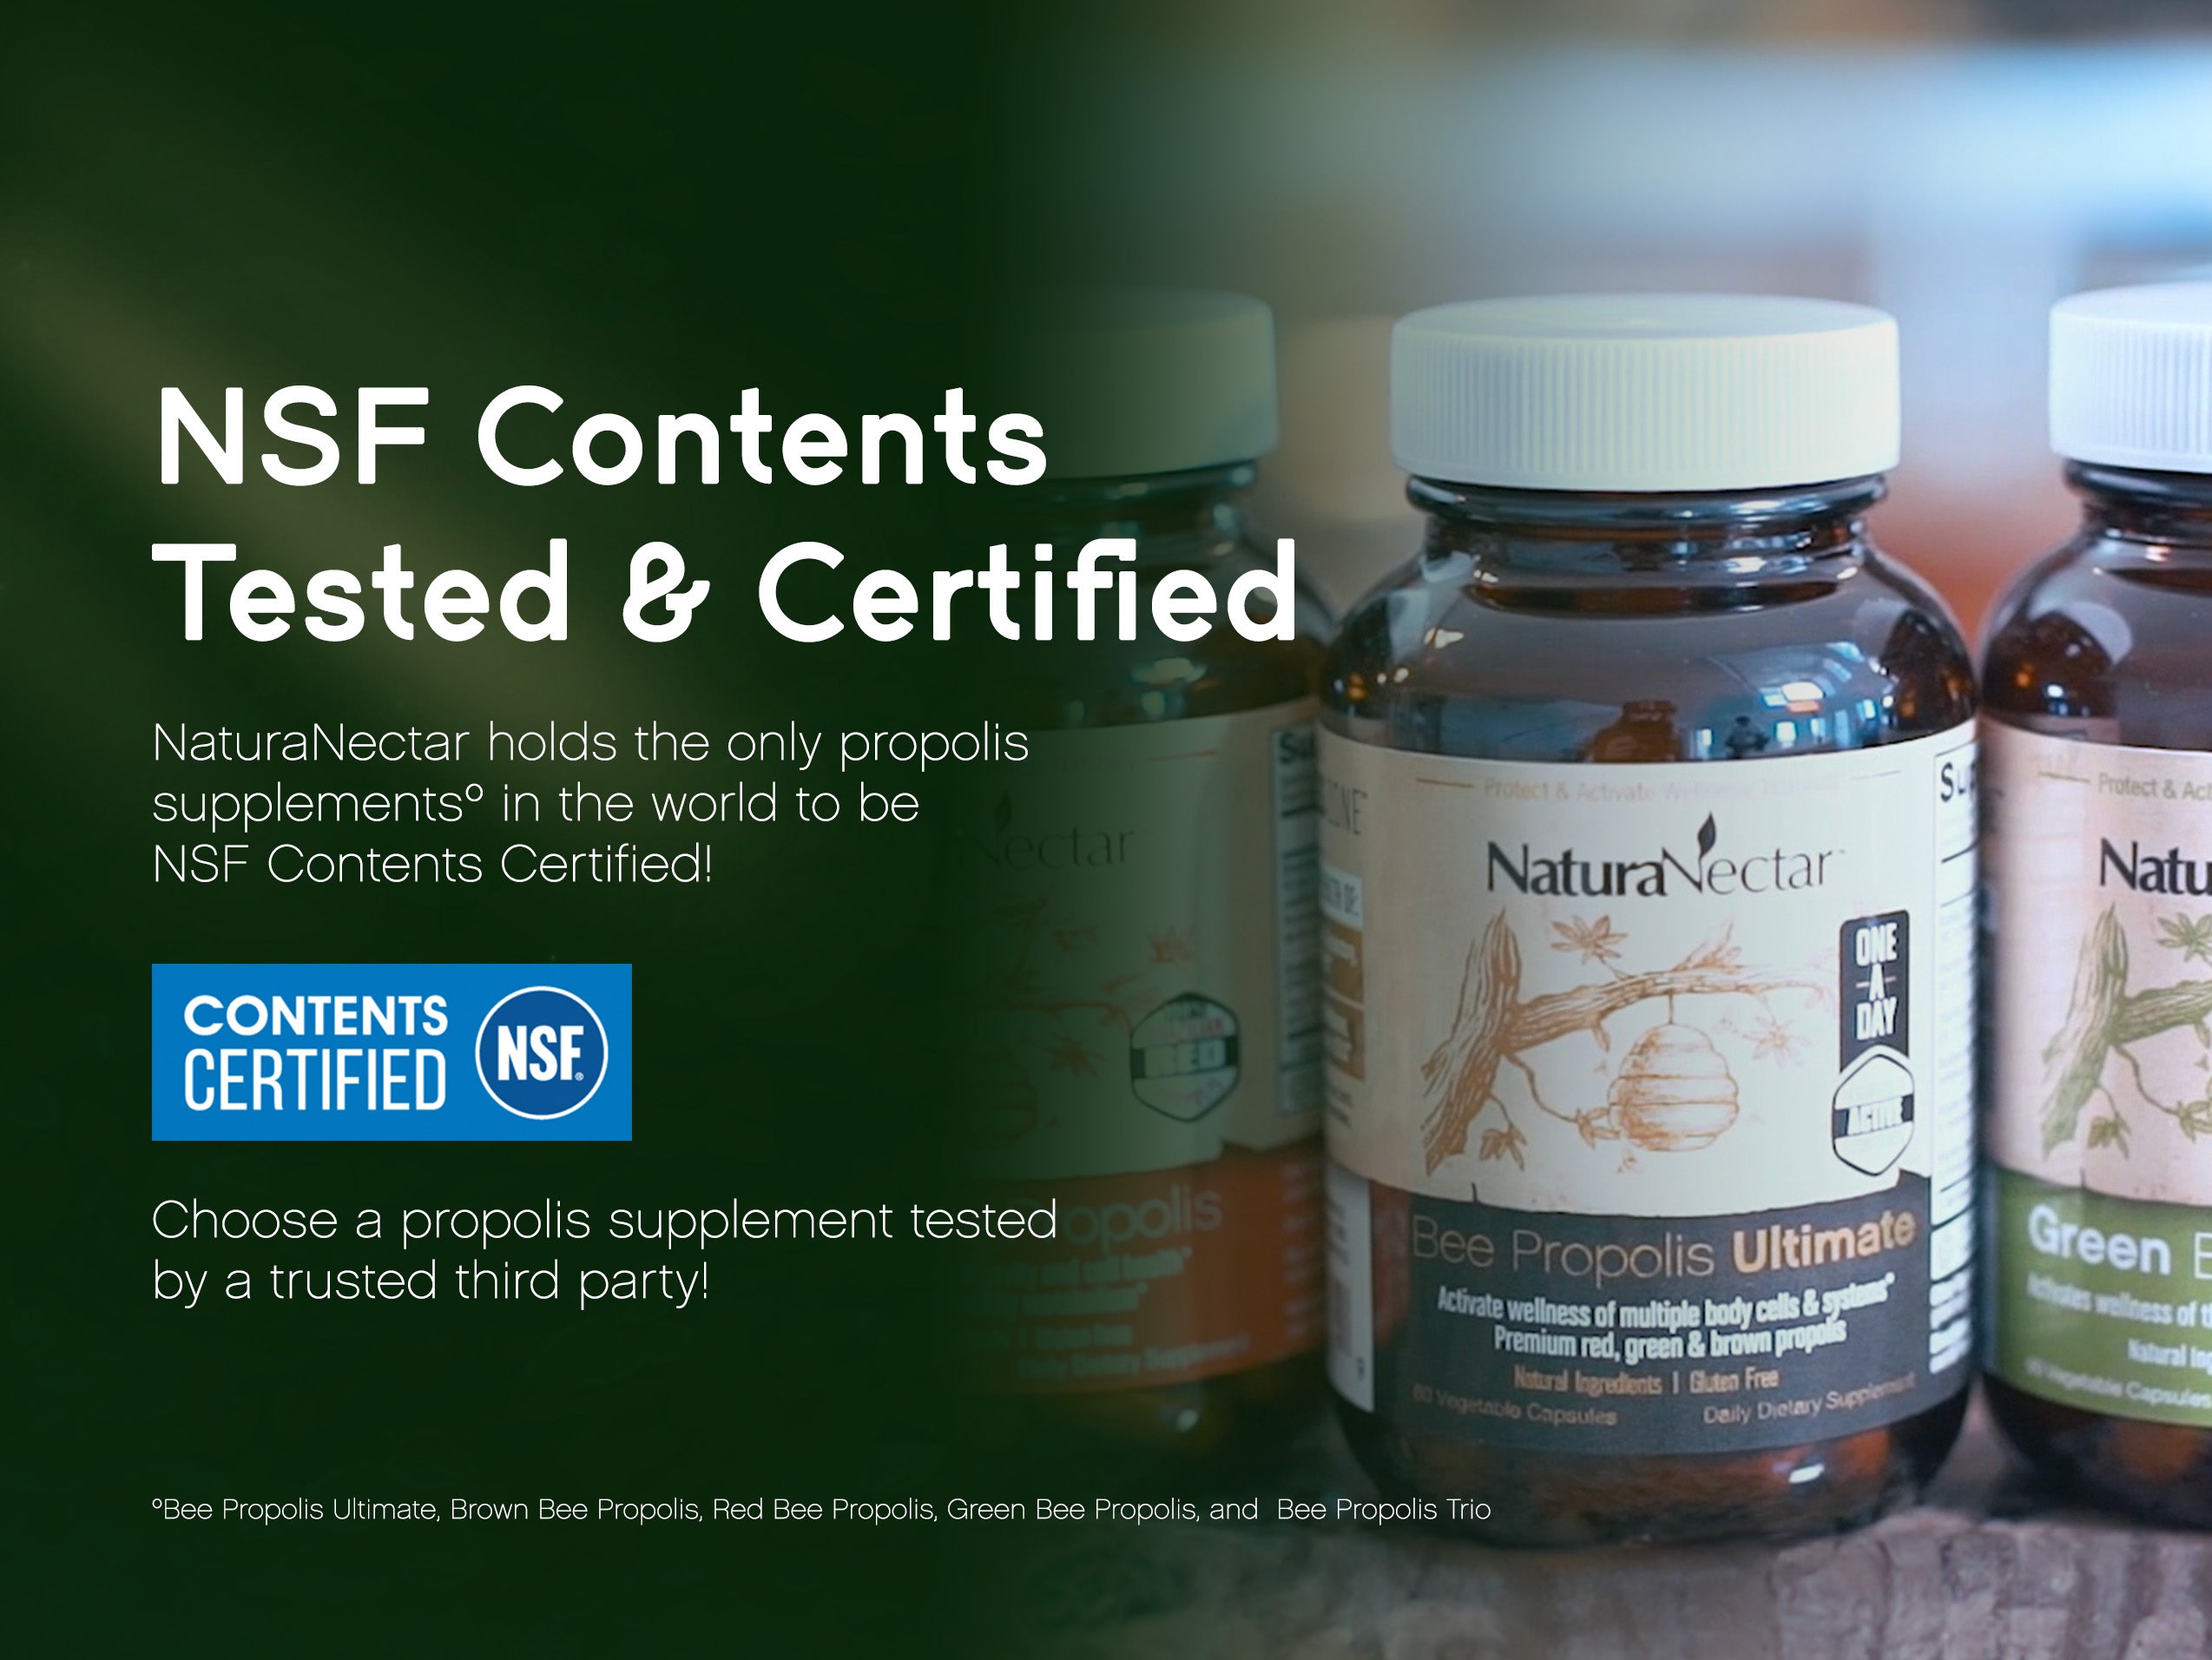 ANSI 173 CERTIFIED SUPPLEMENTS?​